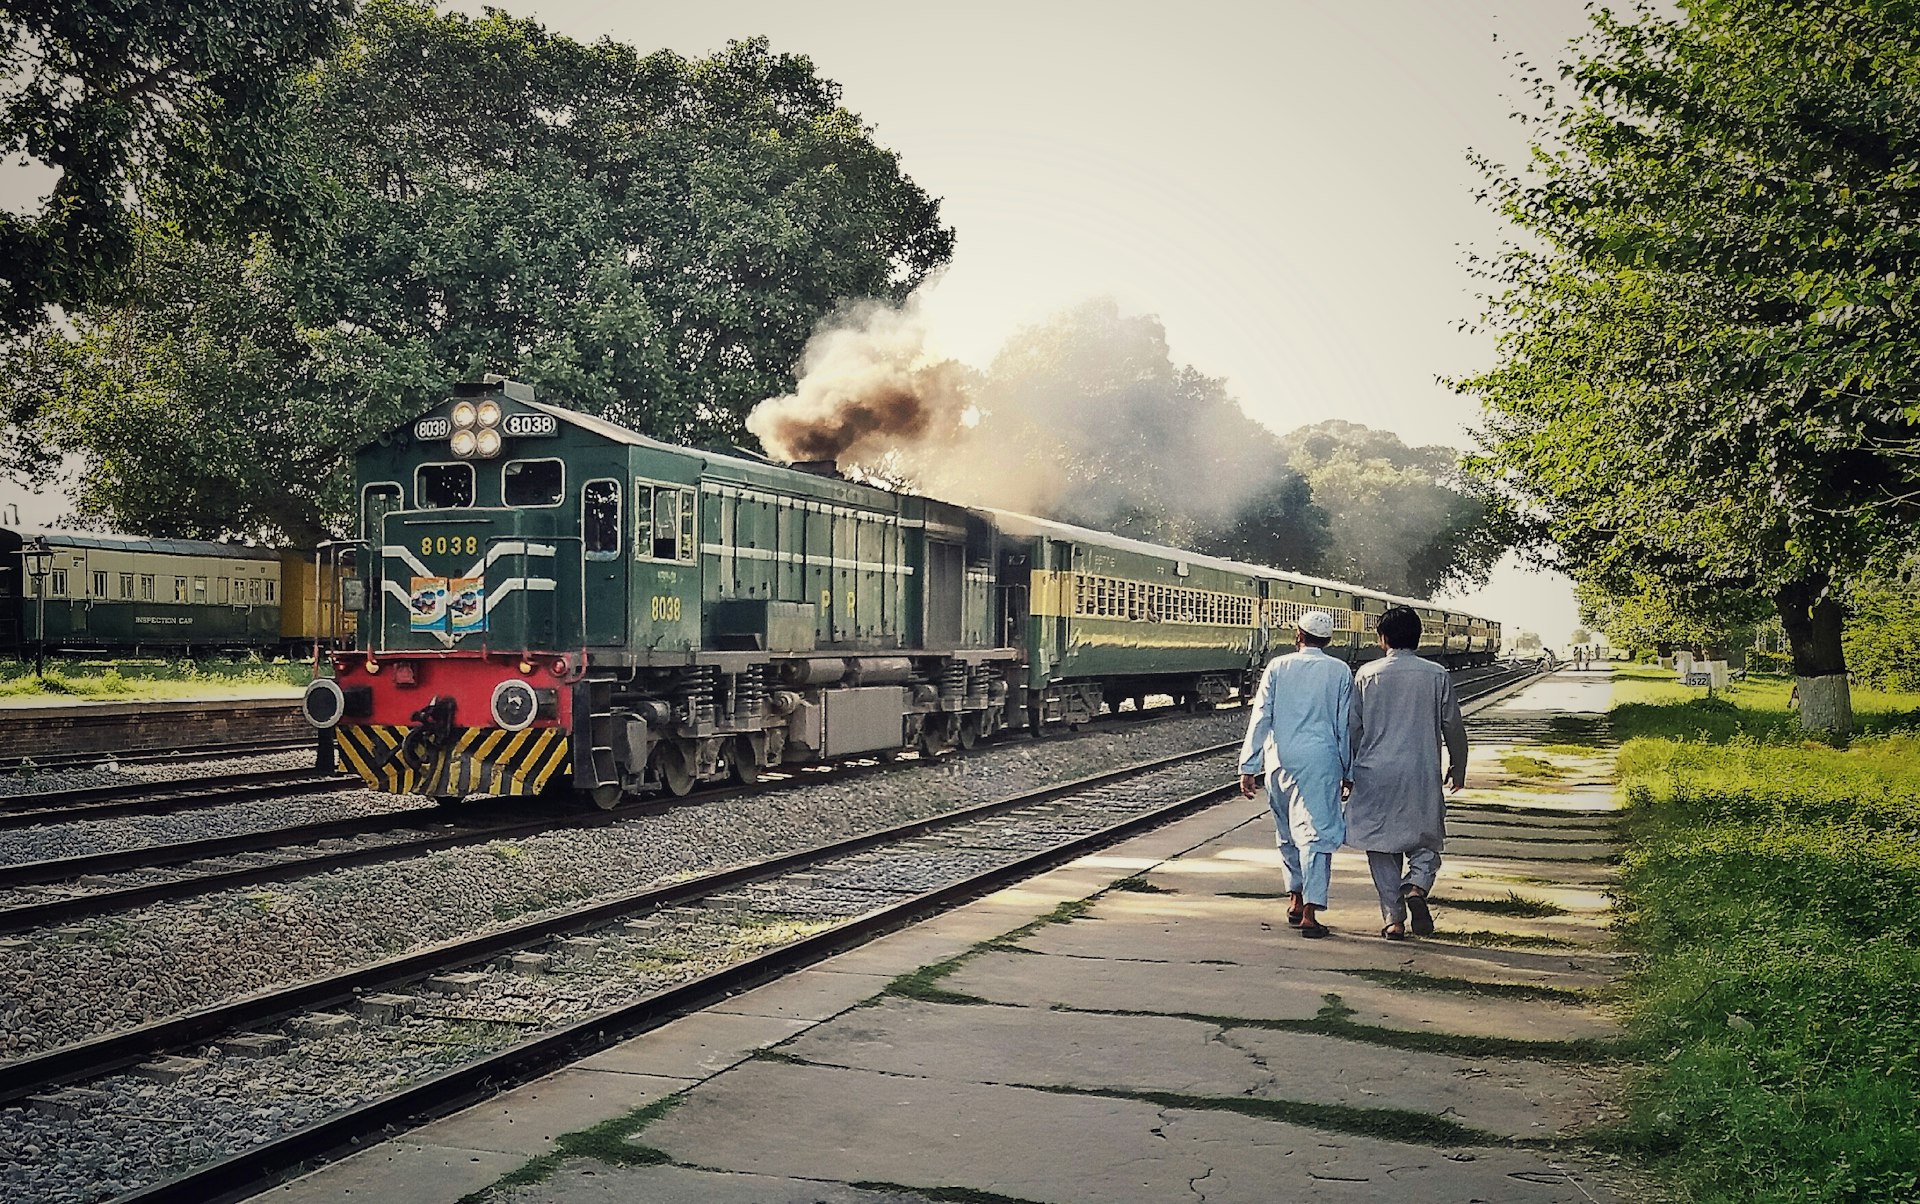 A train pulling into a station in Islamabad, Pakistan